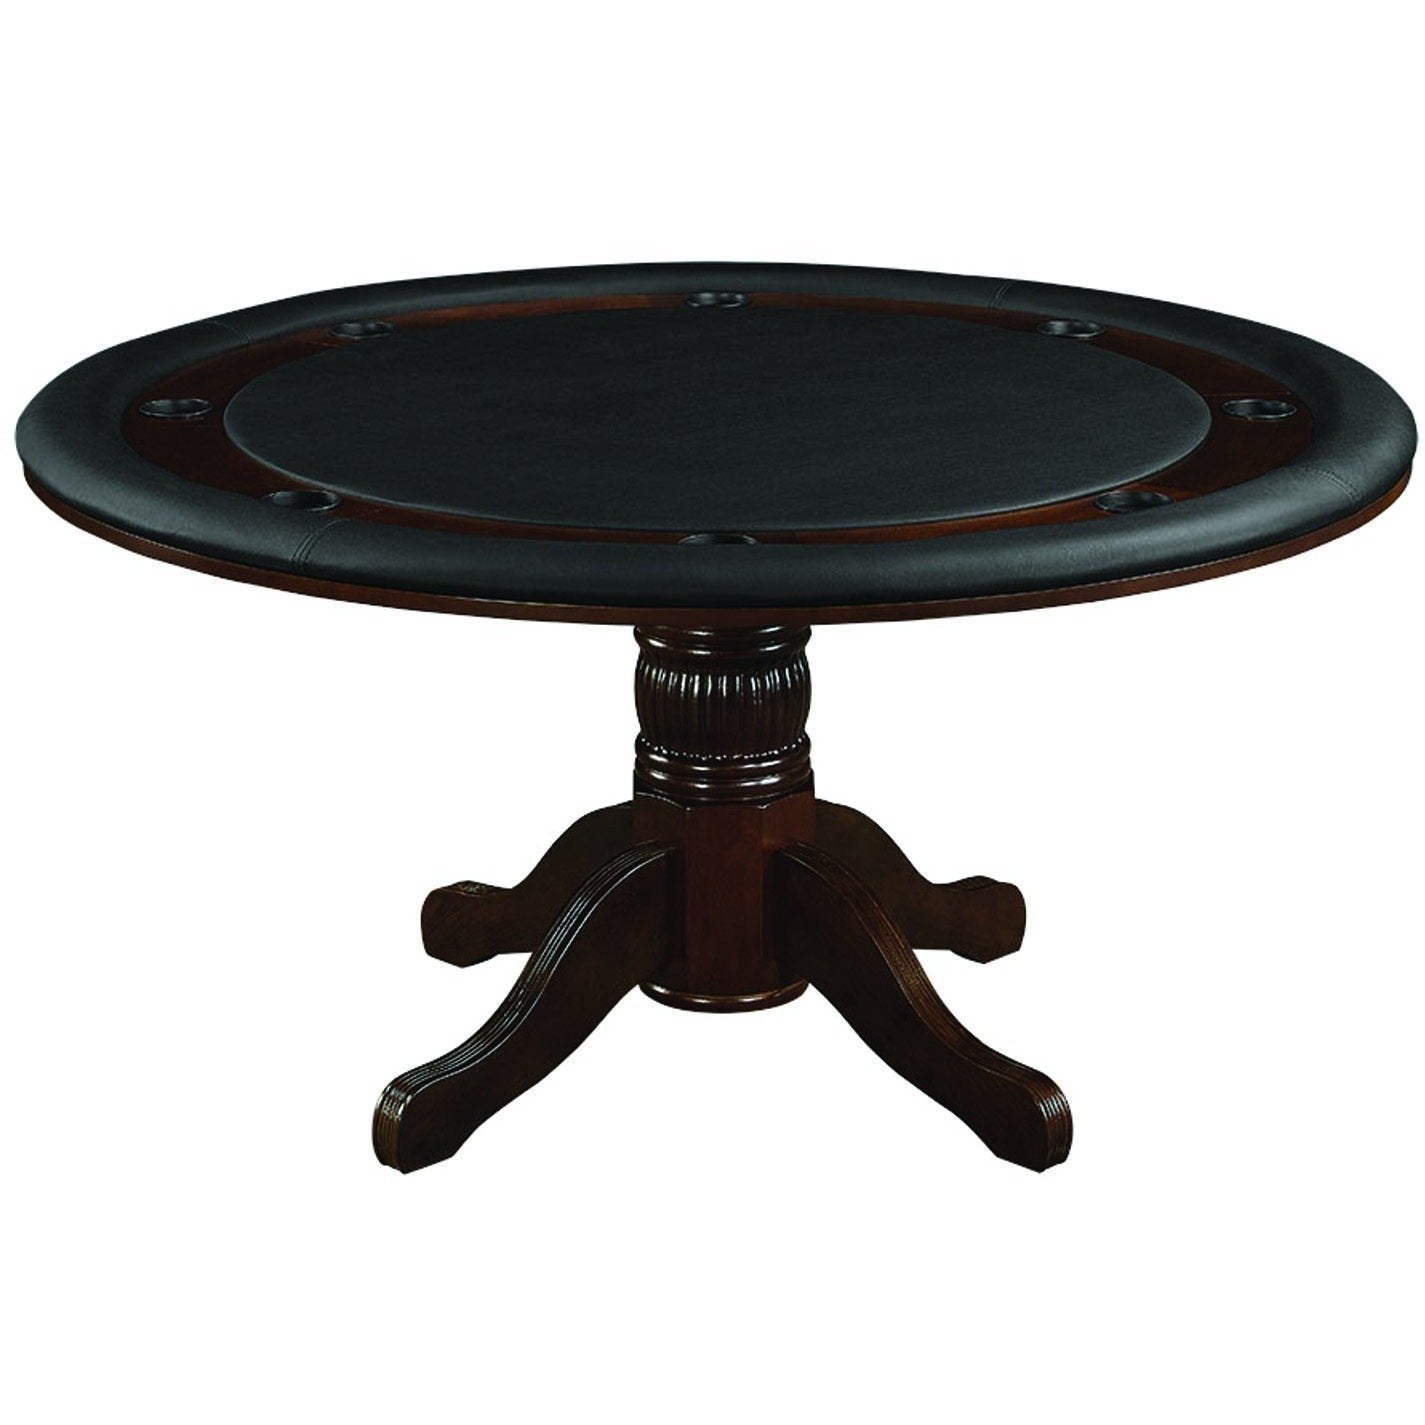 Buy Ram Game Room Round Poker Dining Table W Free Shipping Just Poker Tables